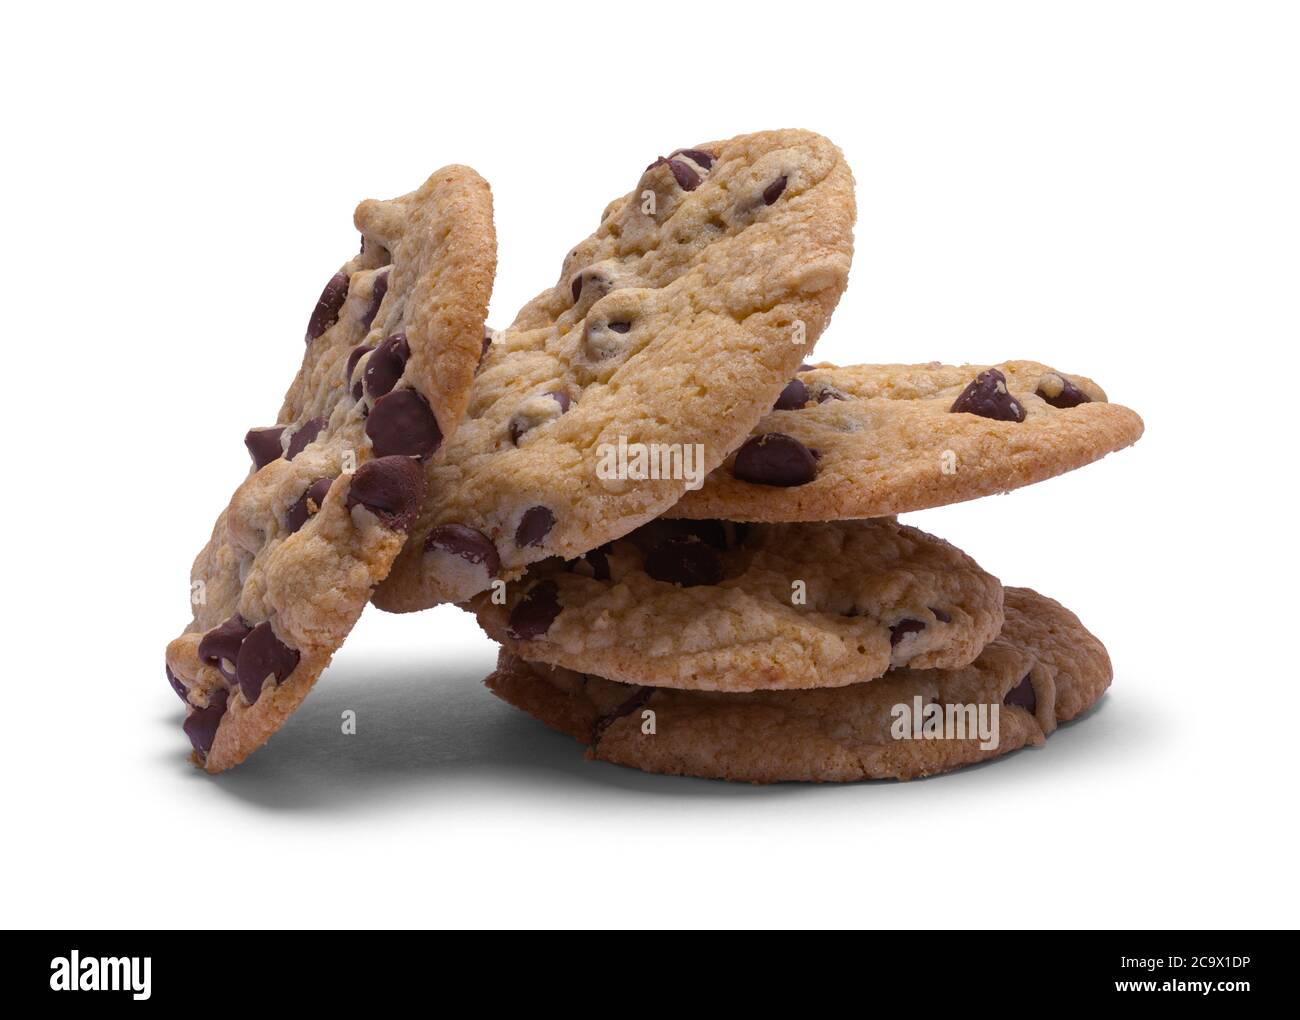 Tipped Pile of Chocolate Chip Cookies Isolated on White. Stock Photo